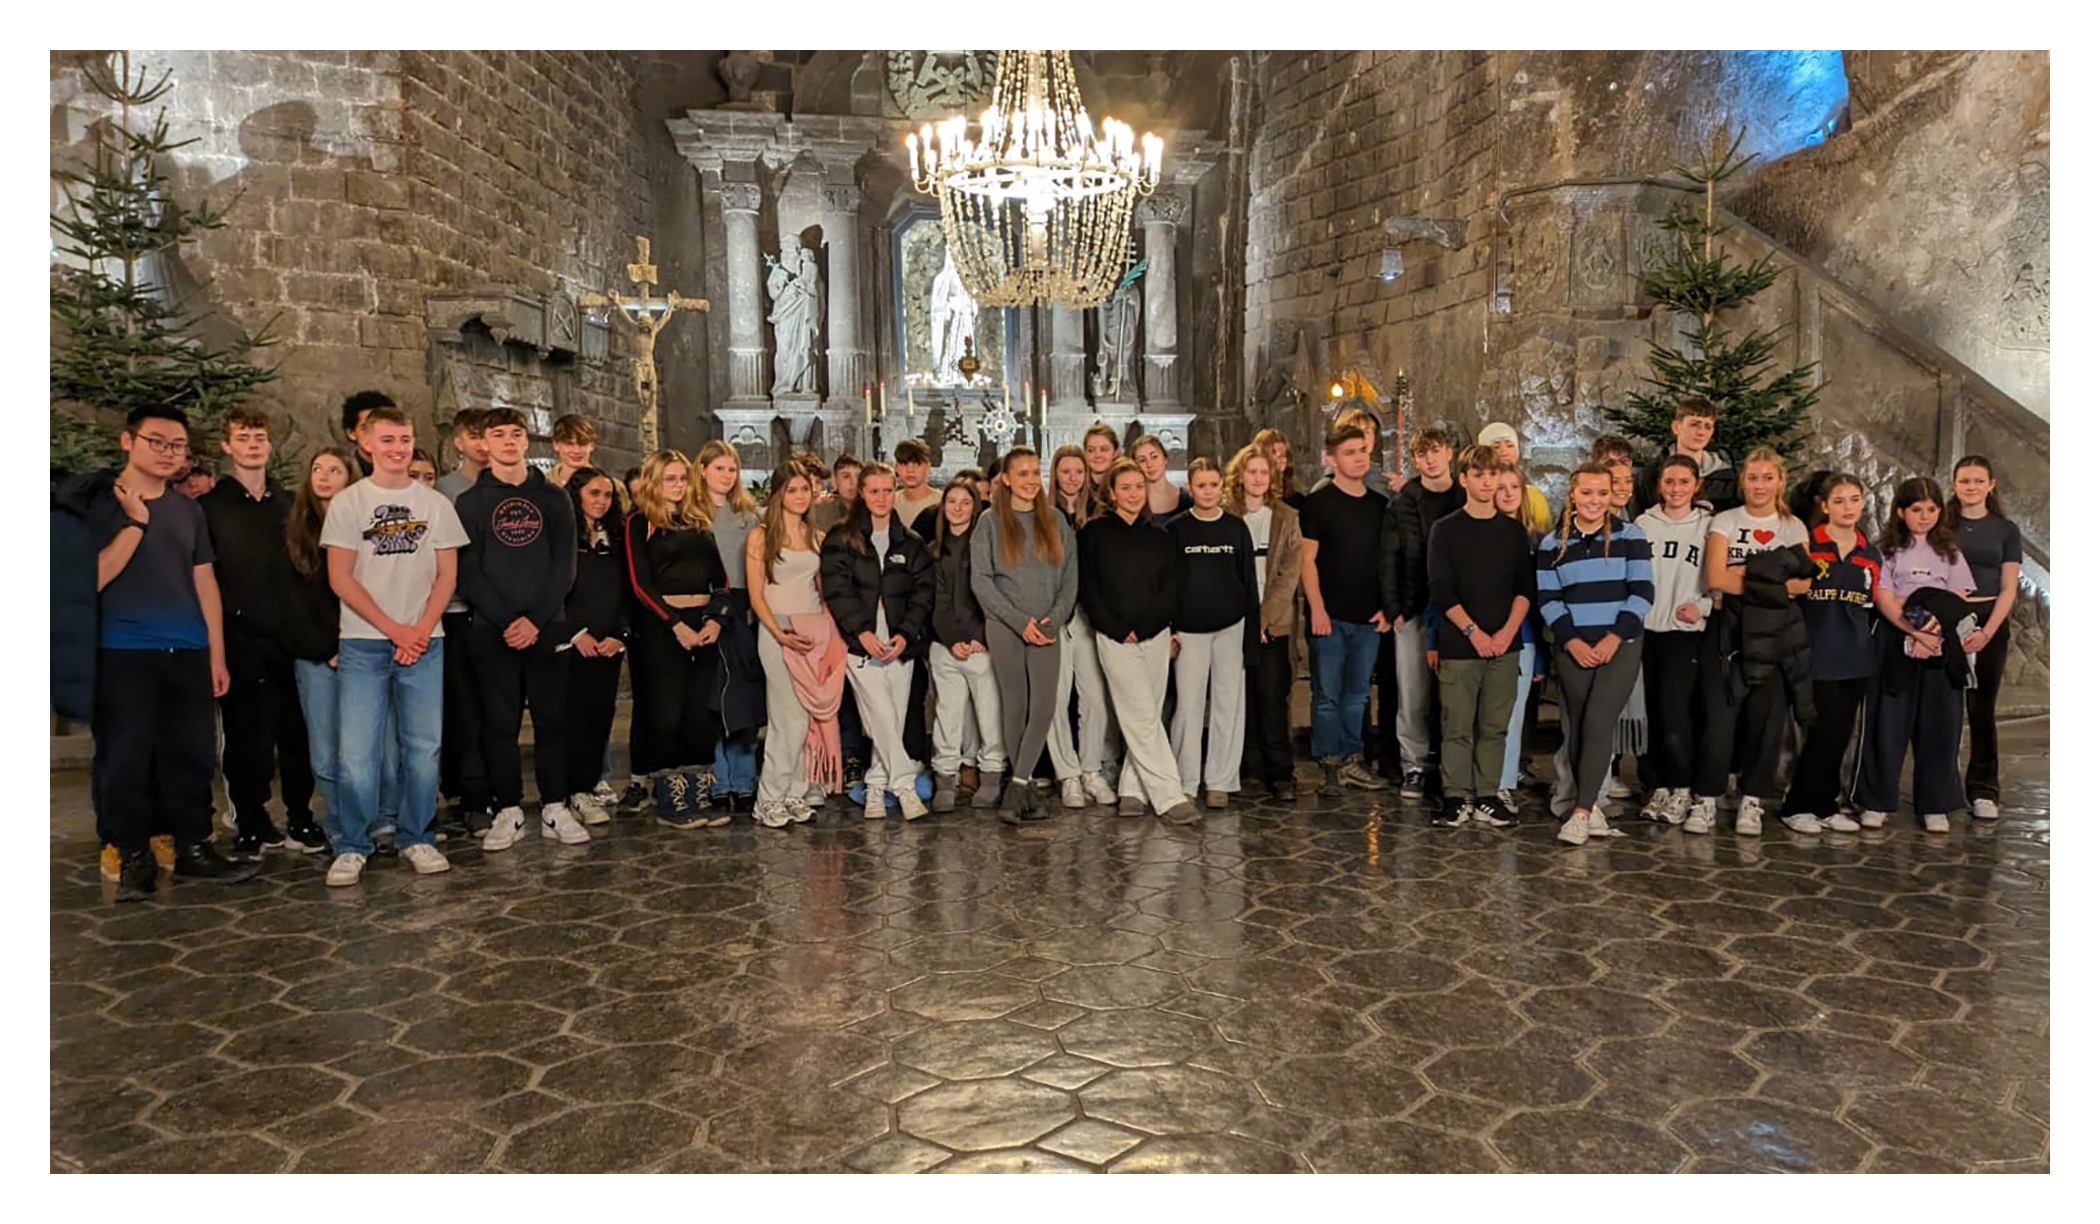 Pupils pose for a photo during the Religious Studies and History trip to Krakow